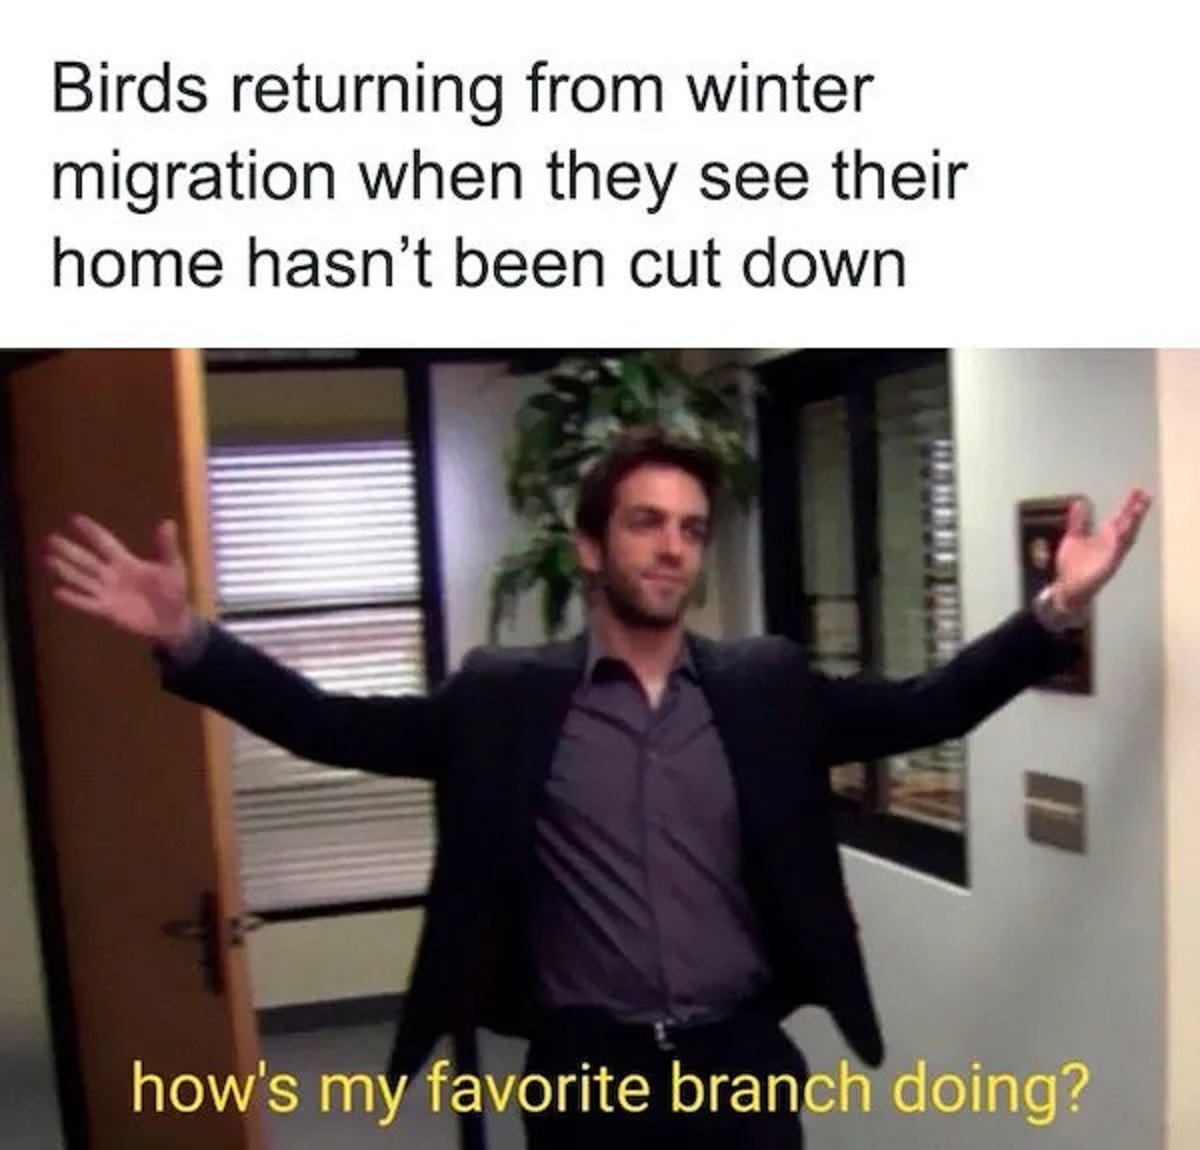 photo caption - Birds returning from winter migration when they see their home hasn't been cut down how's my favorite branch doing?